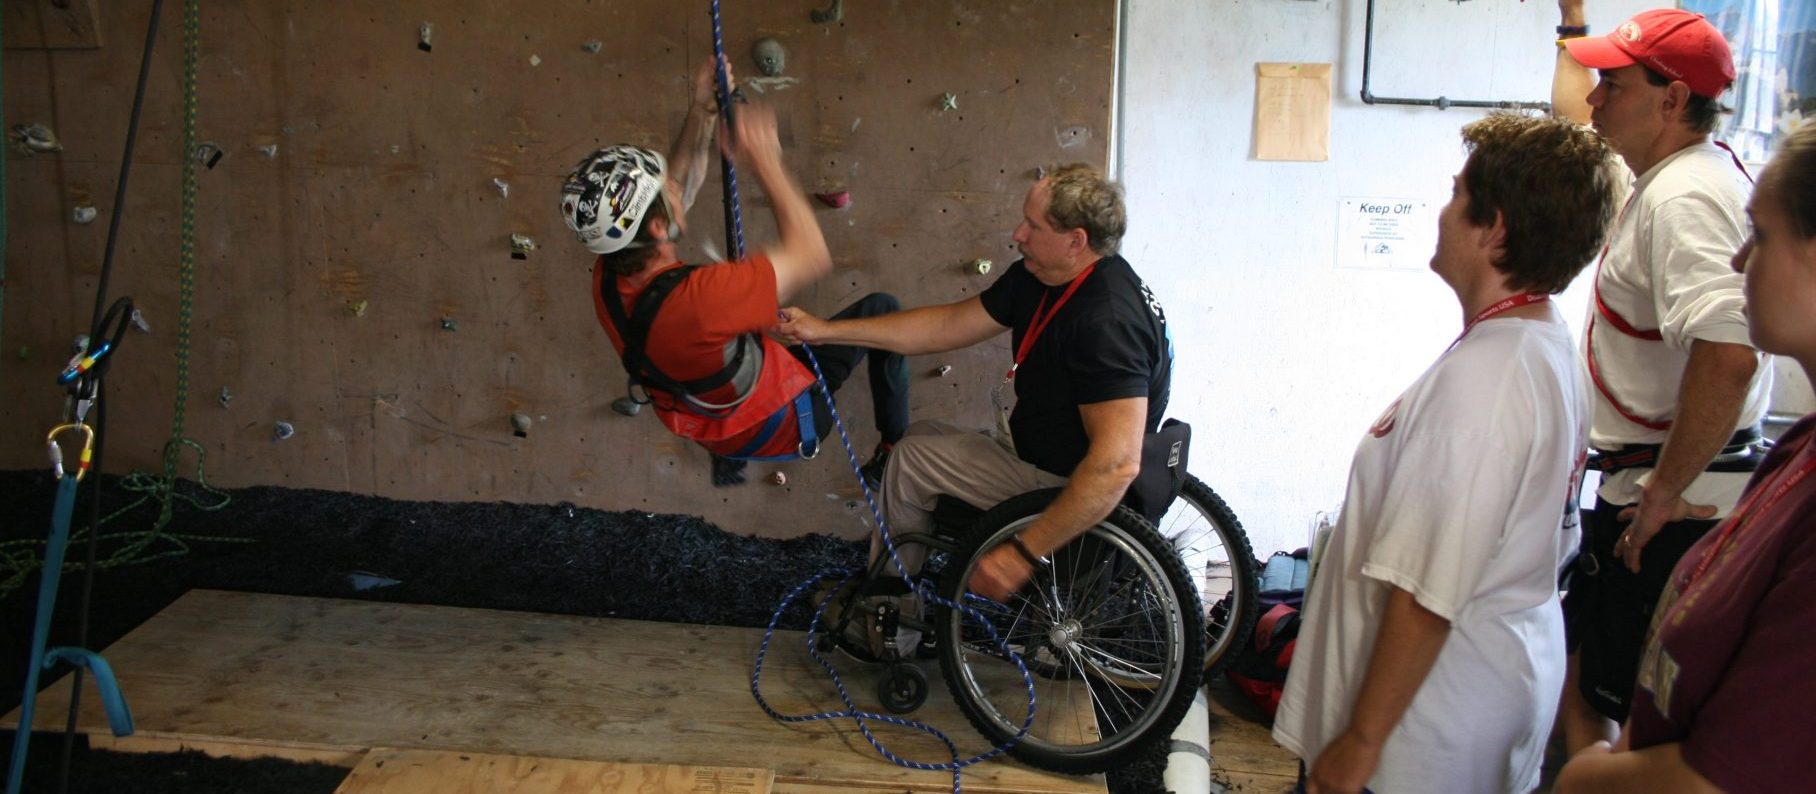 Athlete climbing on rock wall with assistance of instructor in a wheelchair with other participants onlooking